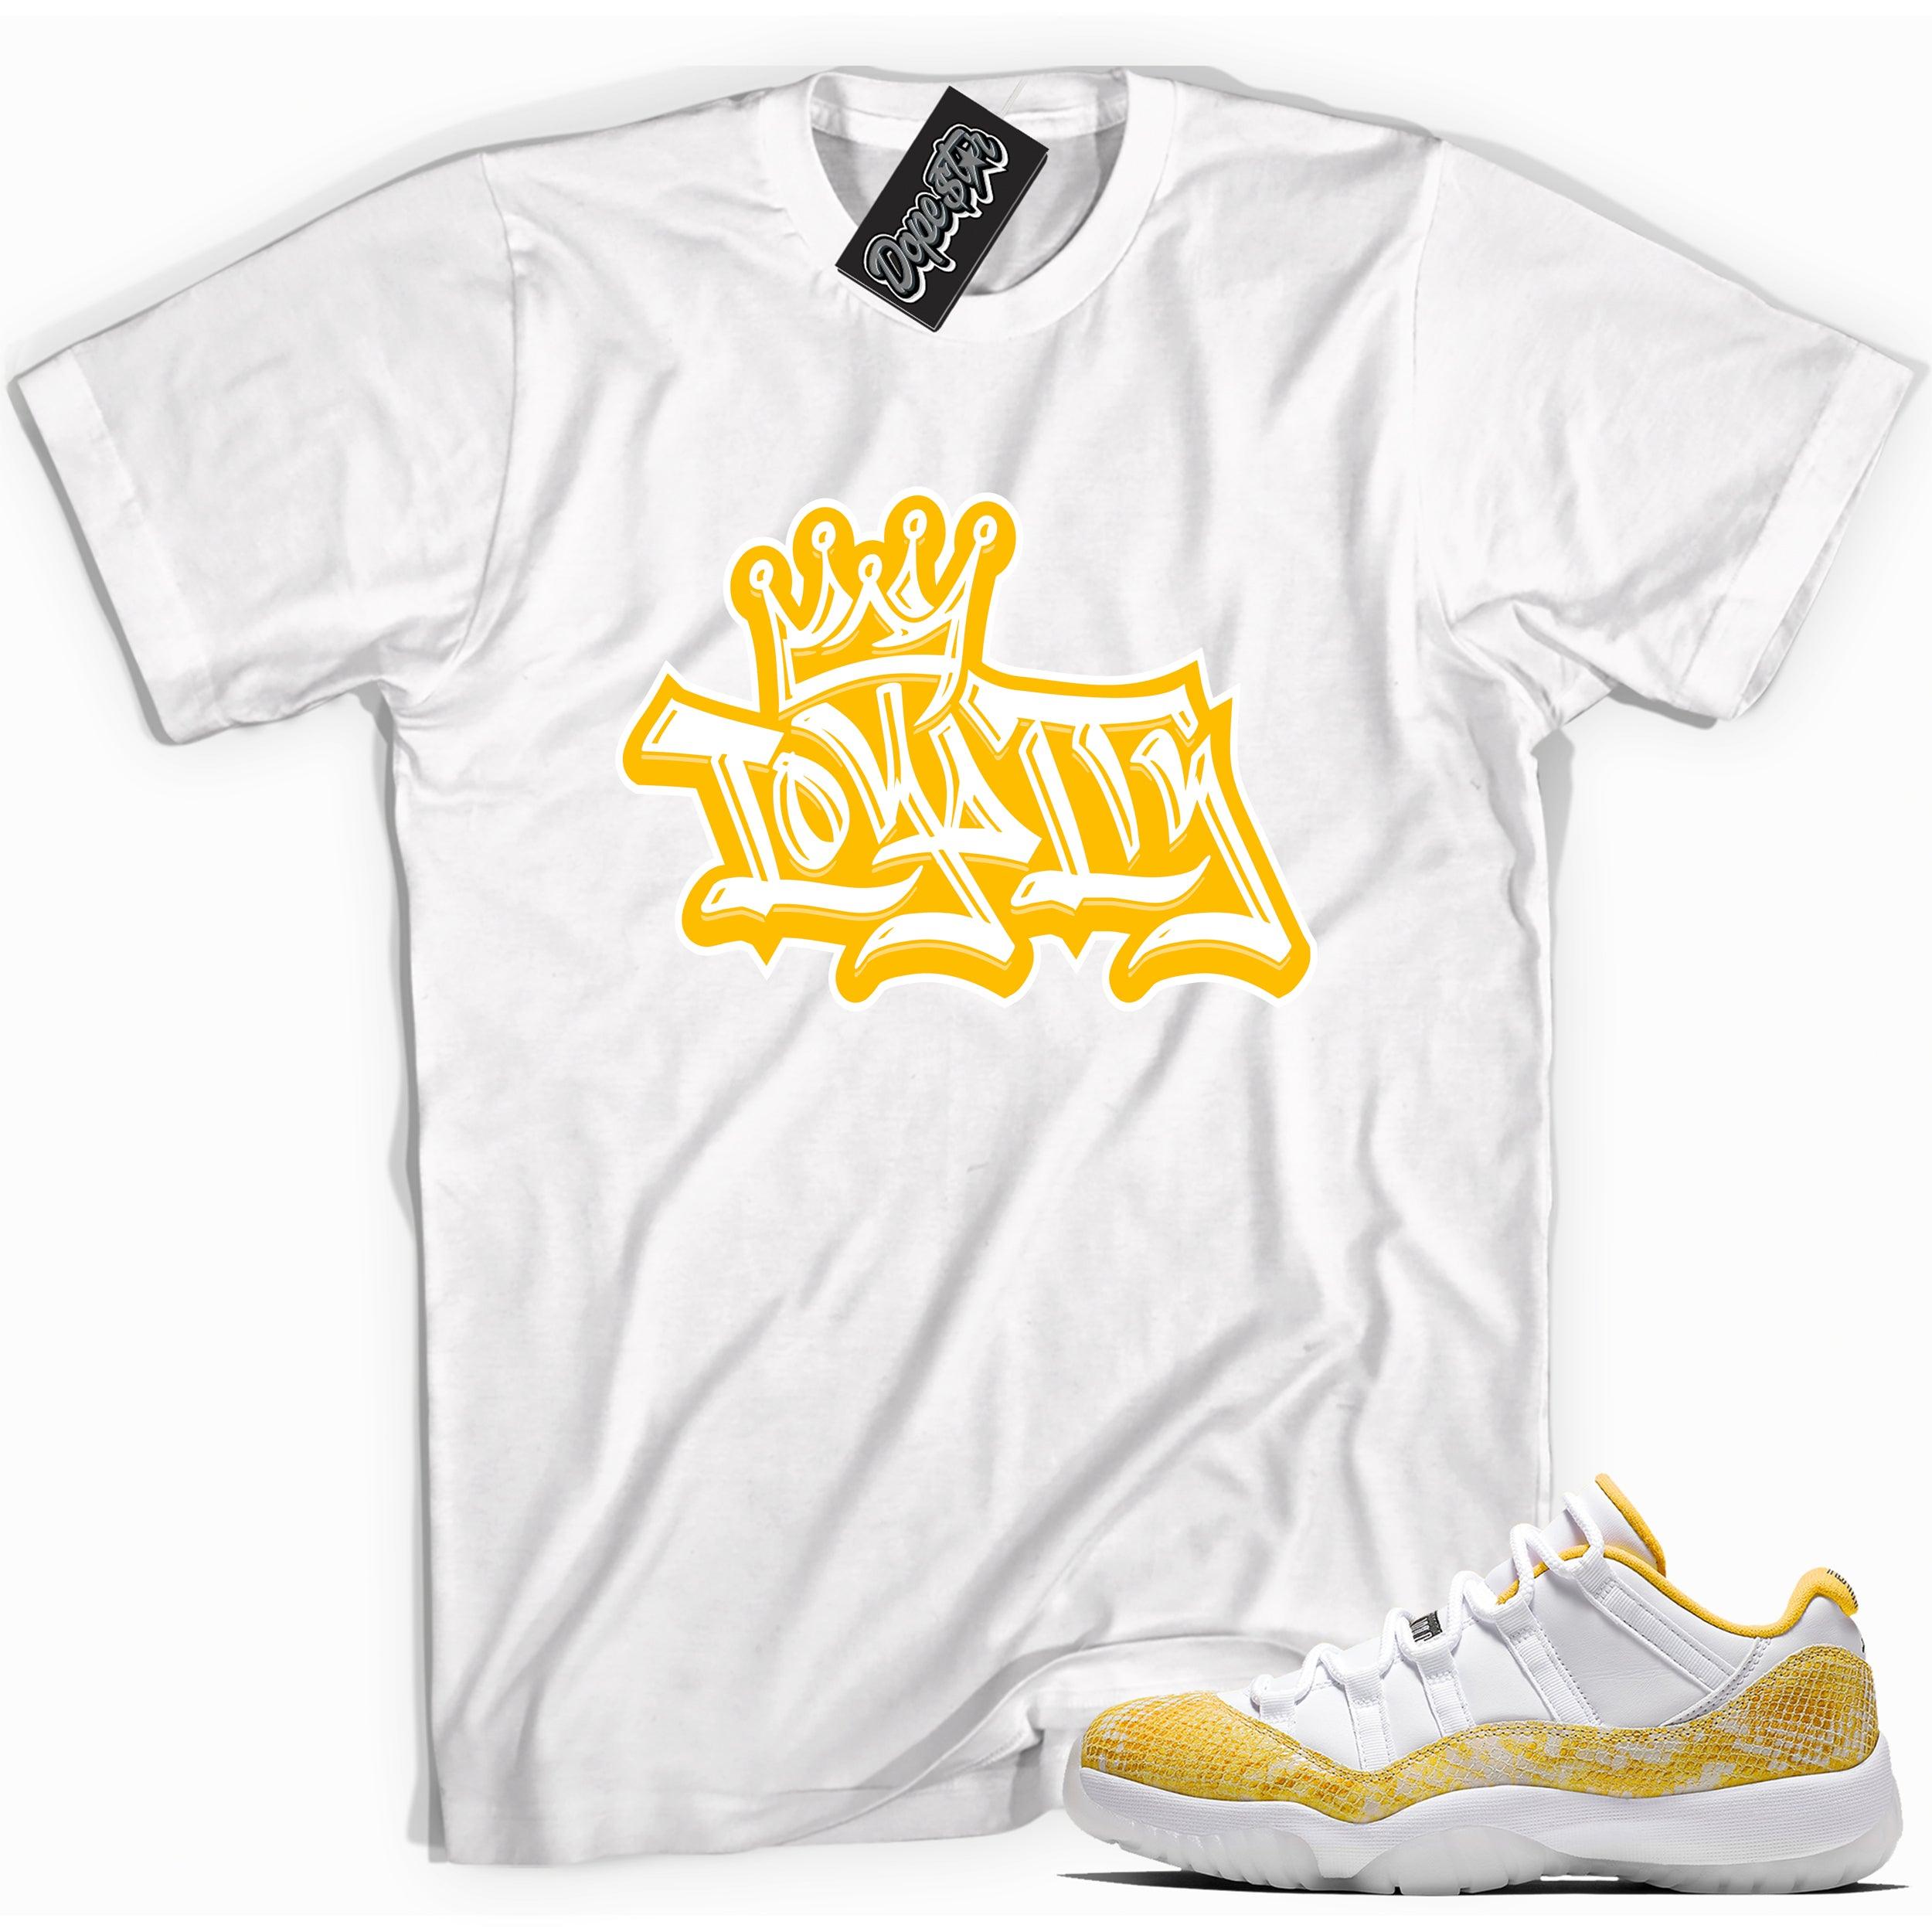 Cool white graphic tee with 'loyalty' print, that perfectly matches Air Jordan 11 Retro Low Yellow Snakeskin sneakers